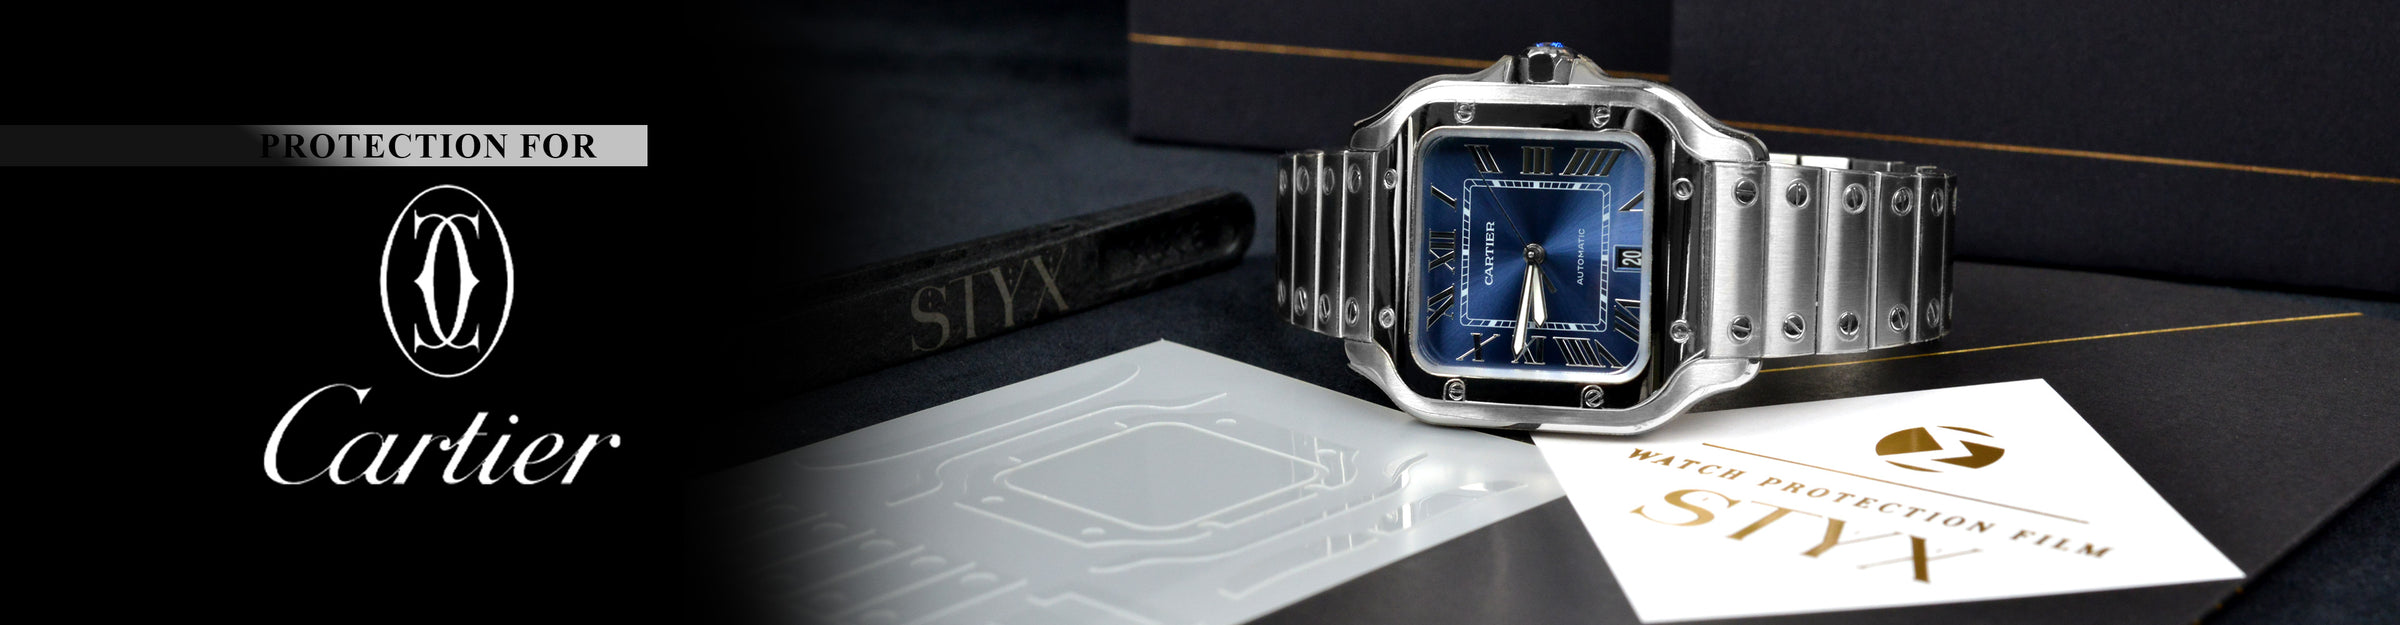 Cartier Protection STYX